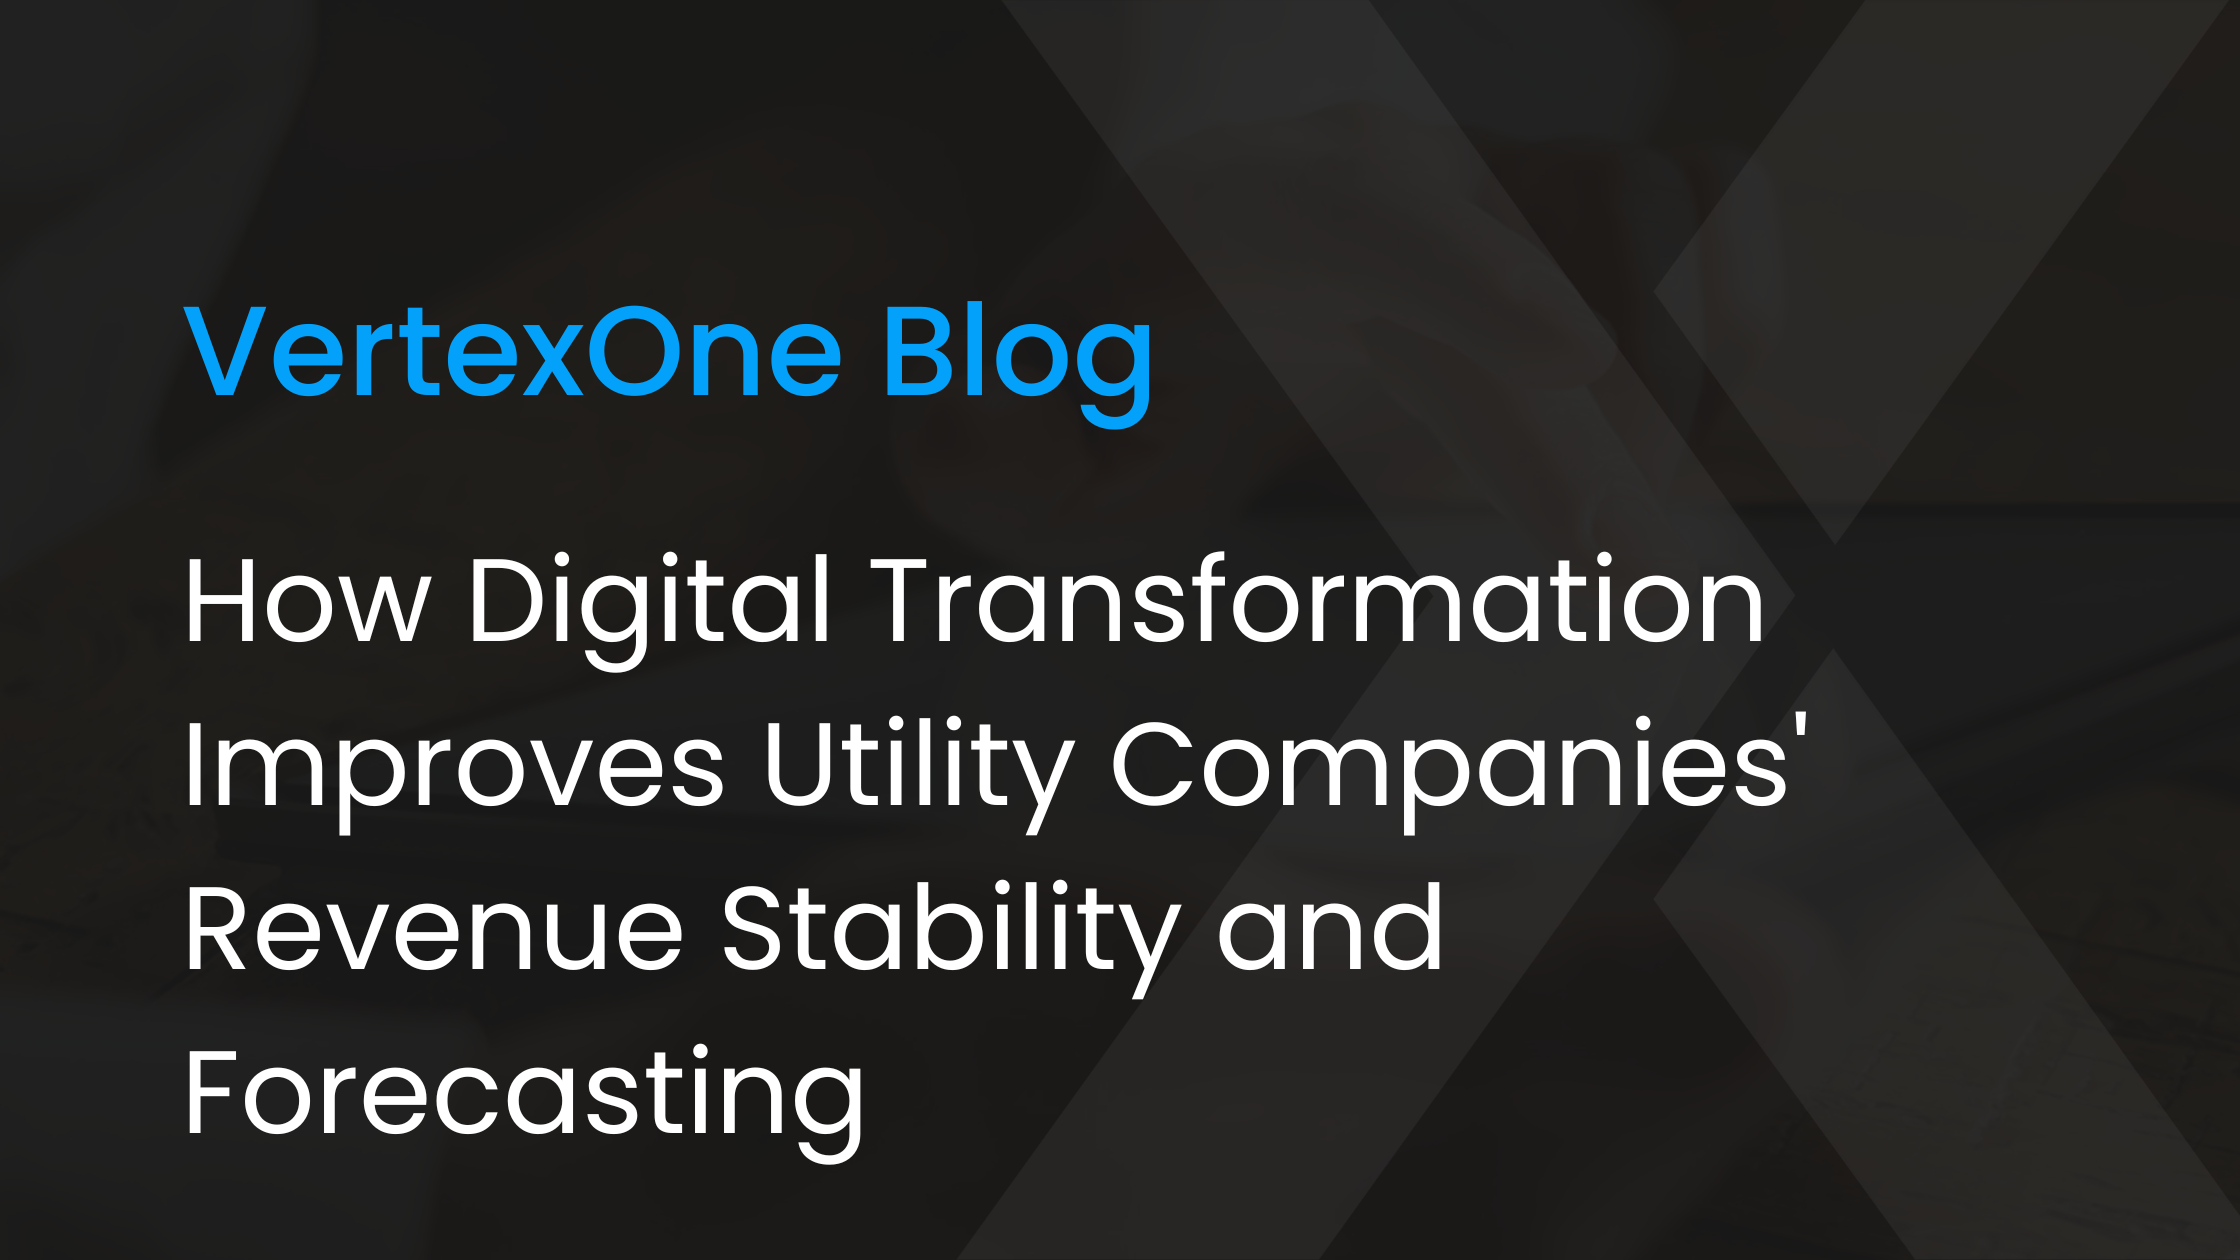 How Digital Transformation Improves Utility Companies' Revenue Stability and Forecasting